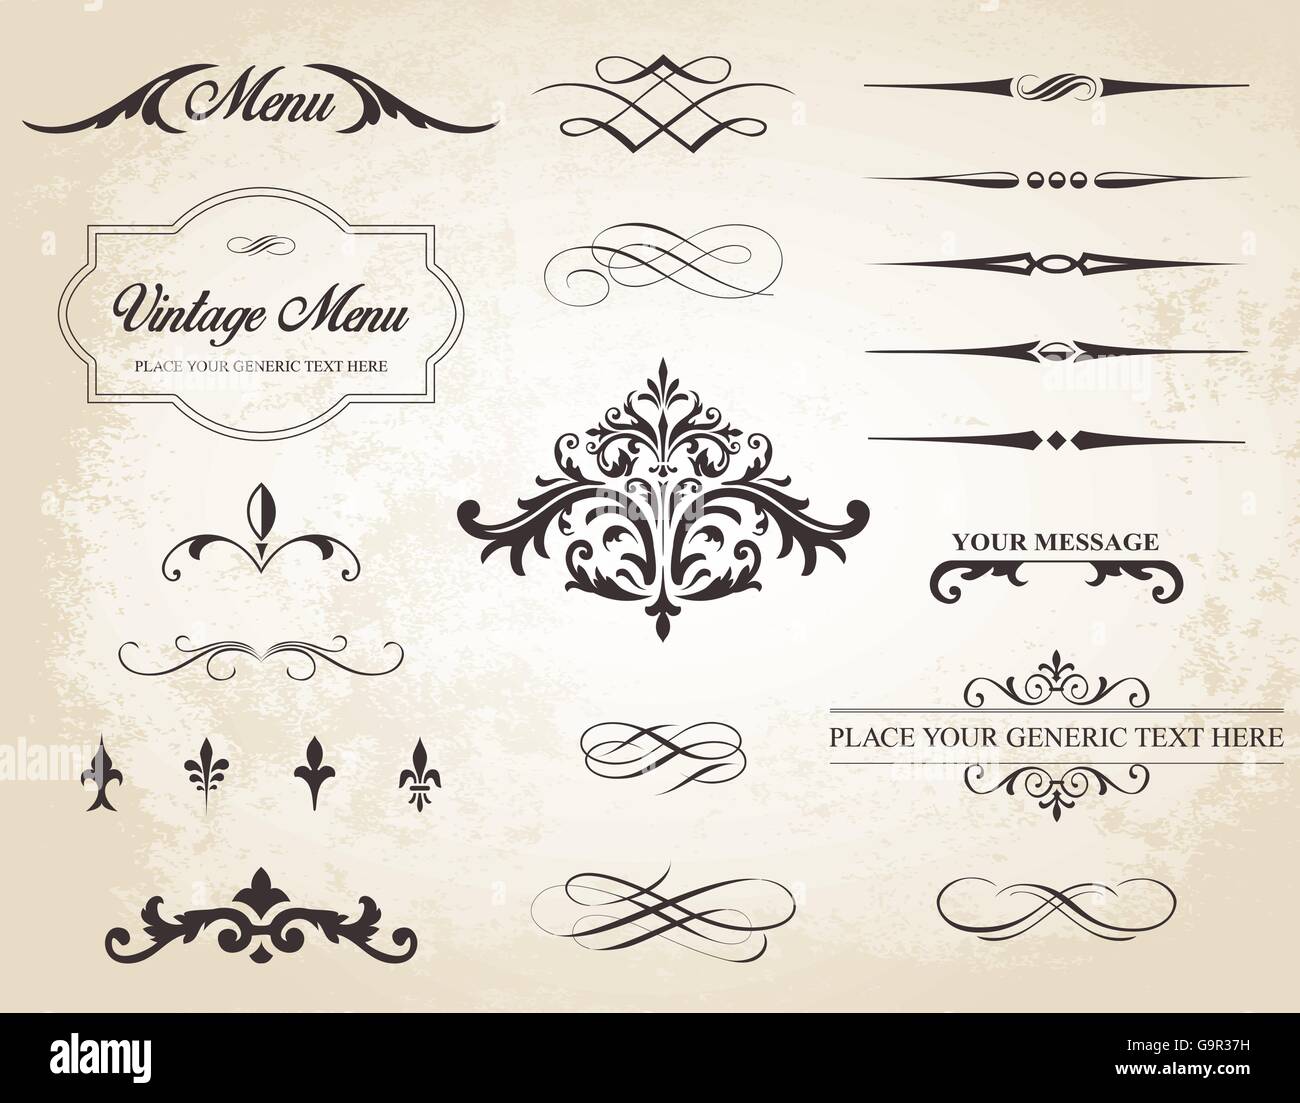 This image is a vector set that contains calligraphic elements, borders, page dividers, page decoration and ornaments. Stock Vector